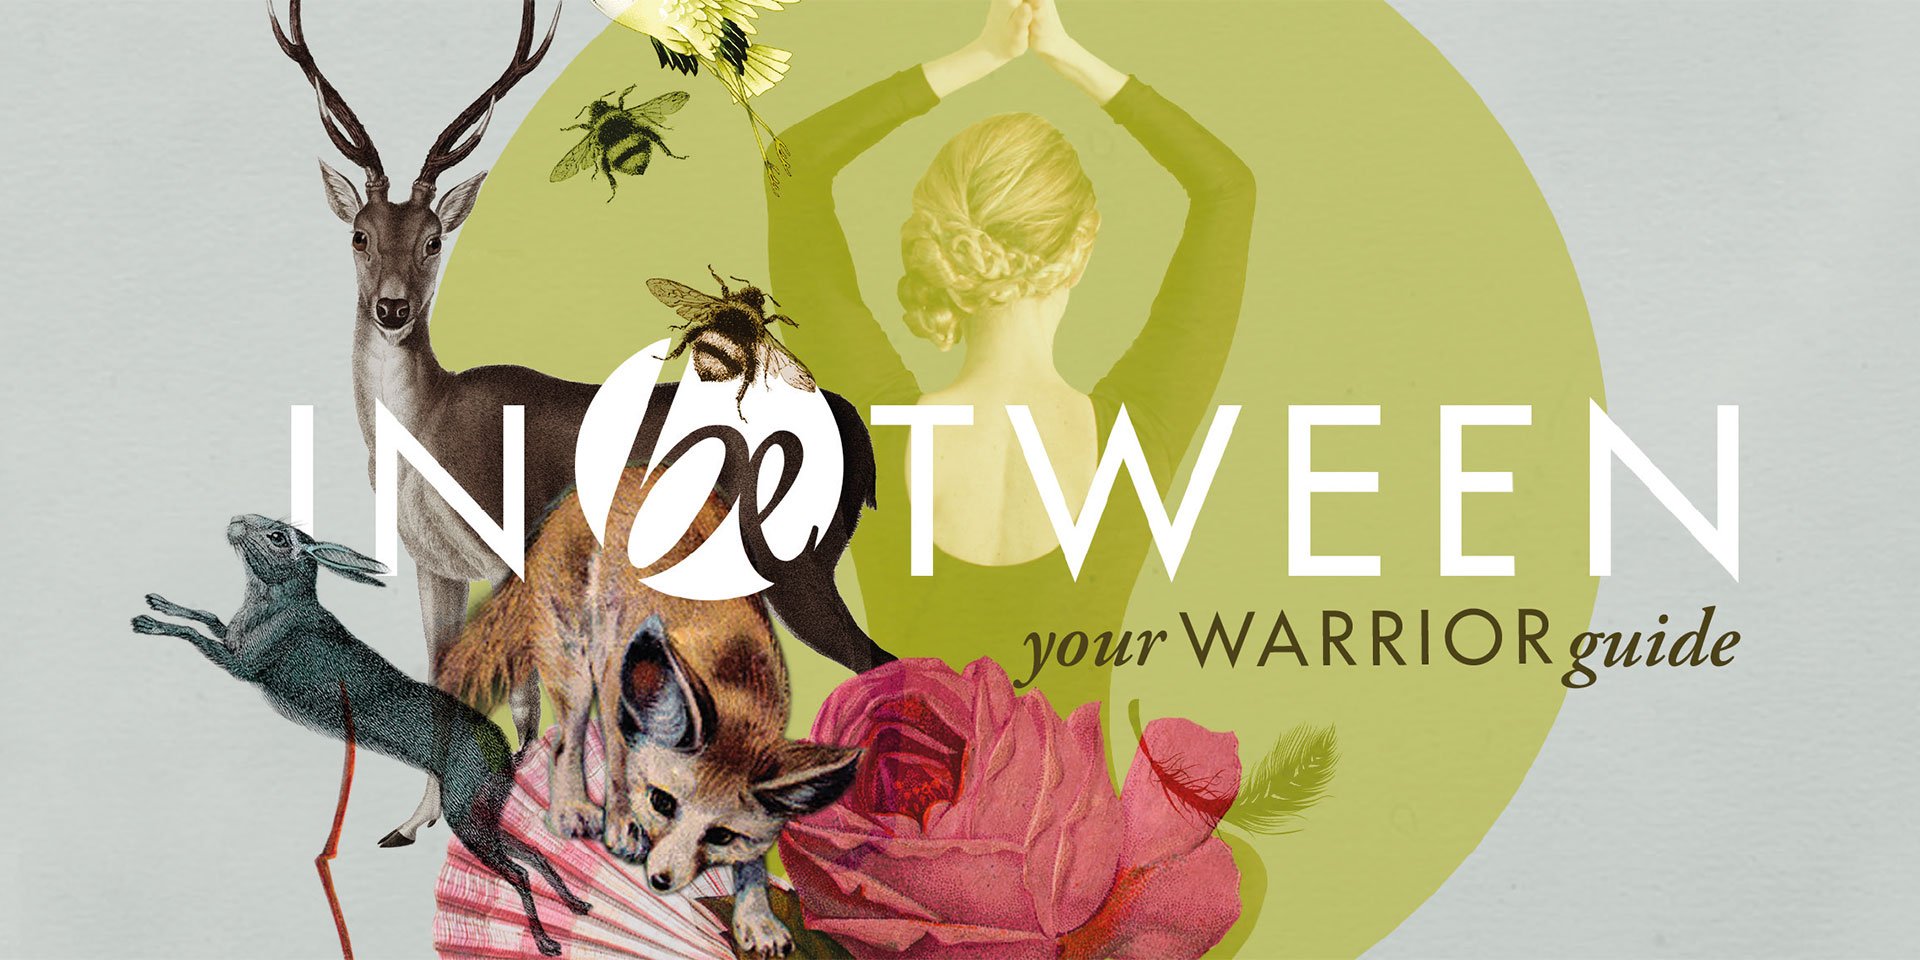 Inbetween Book cover art with woman in yoga pose, stags, foxes, roses, bees and a hare